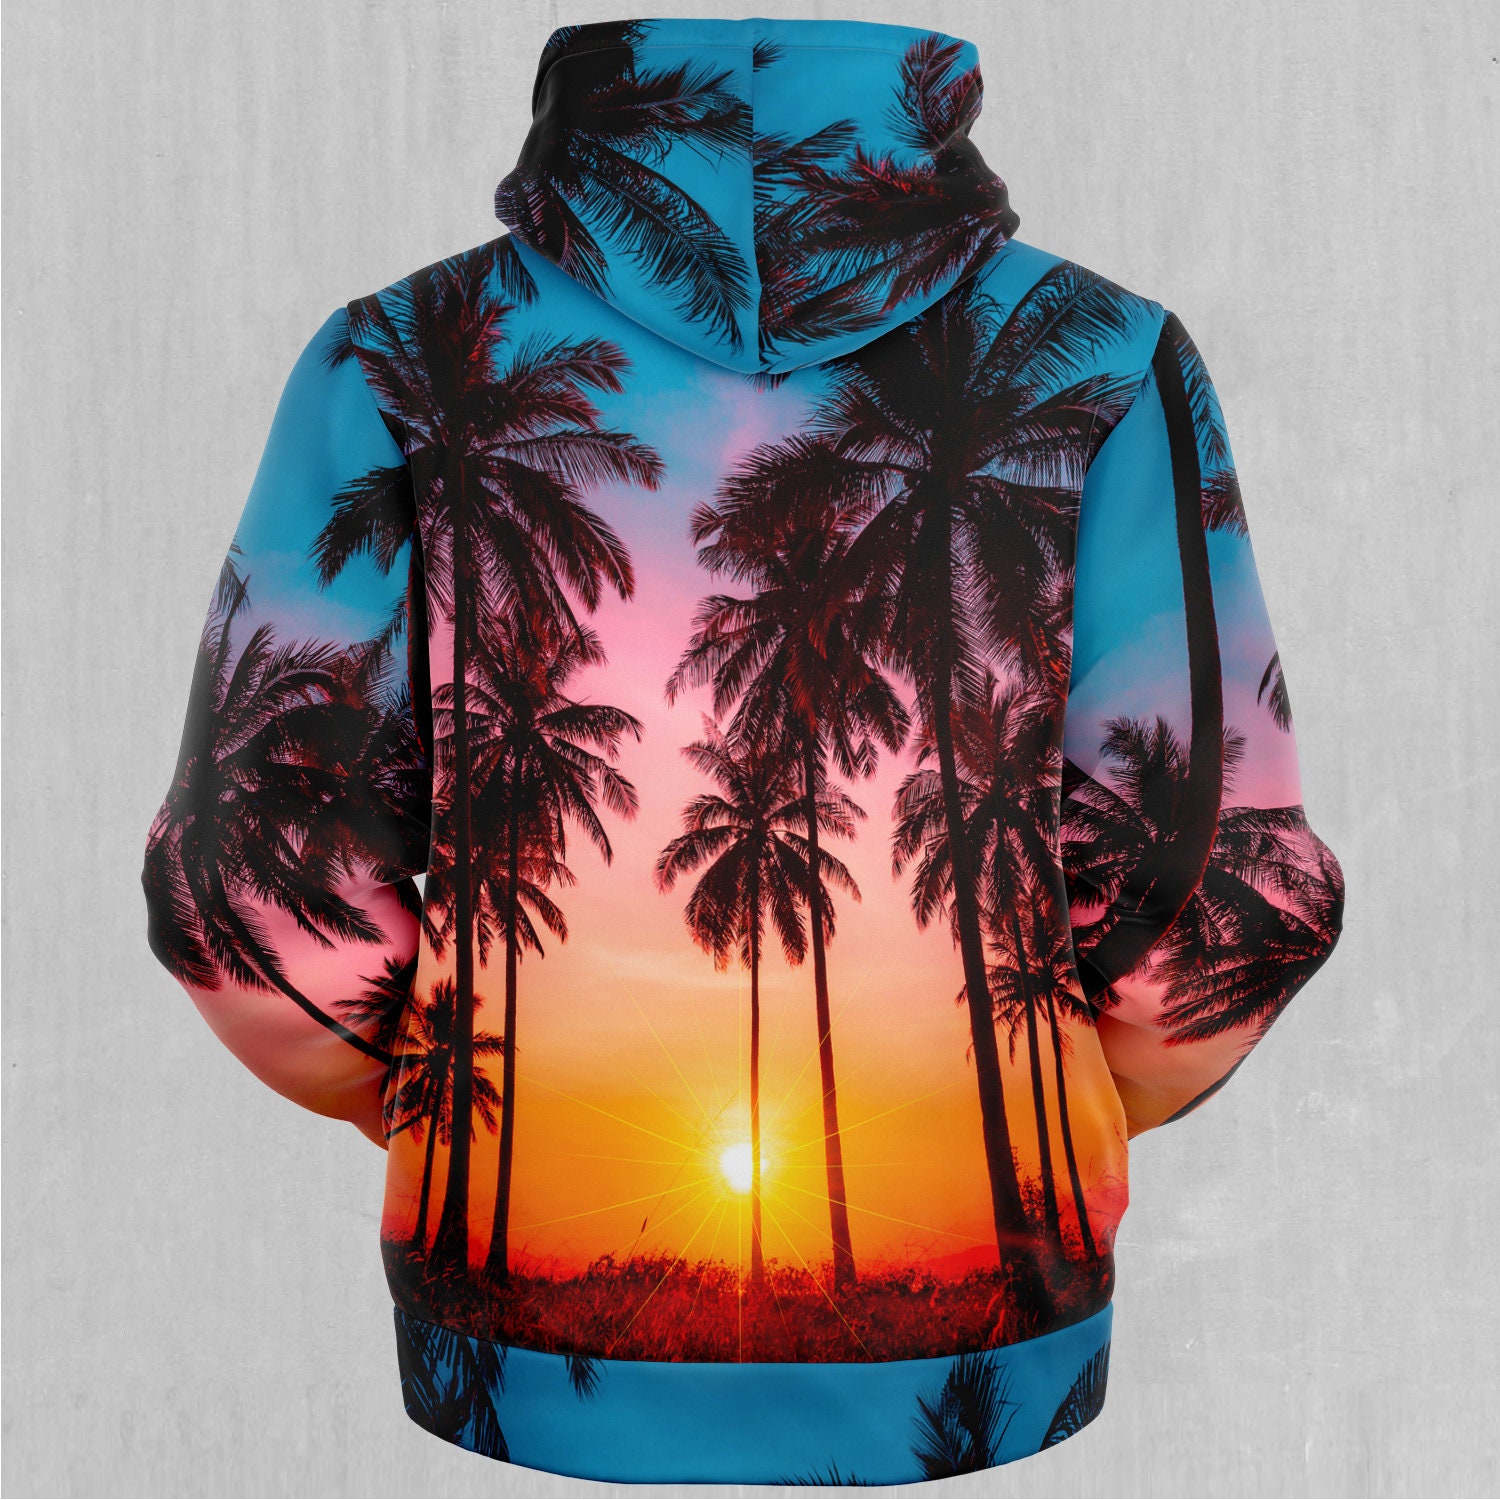 Discover Coastal Dreams Palm Trees Tropical Abstract Pattern Sherpa Microfleece Zip-Up Hoodie